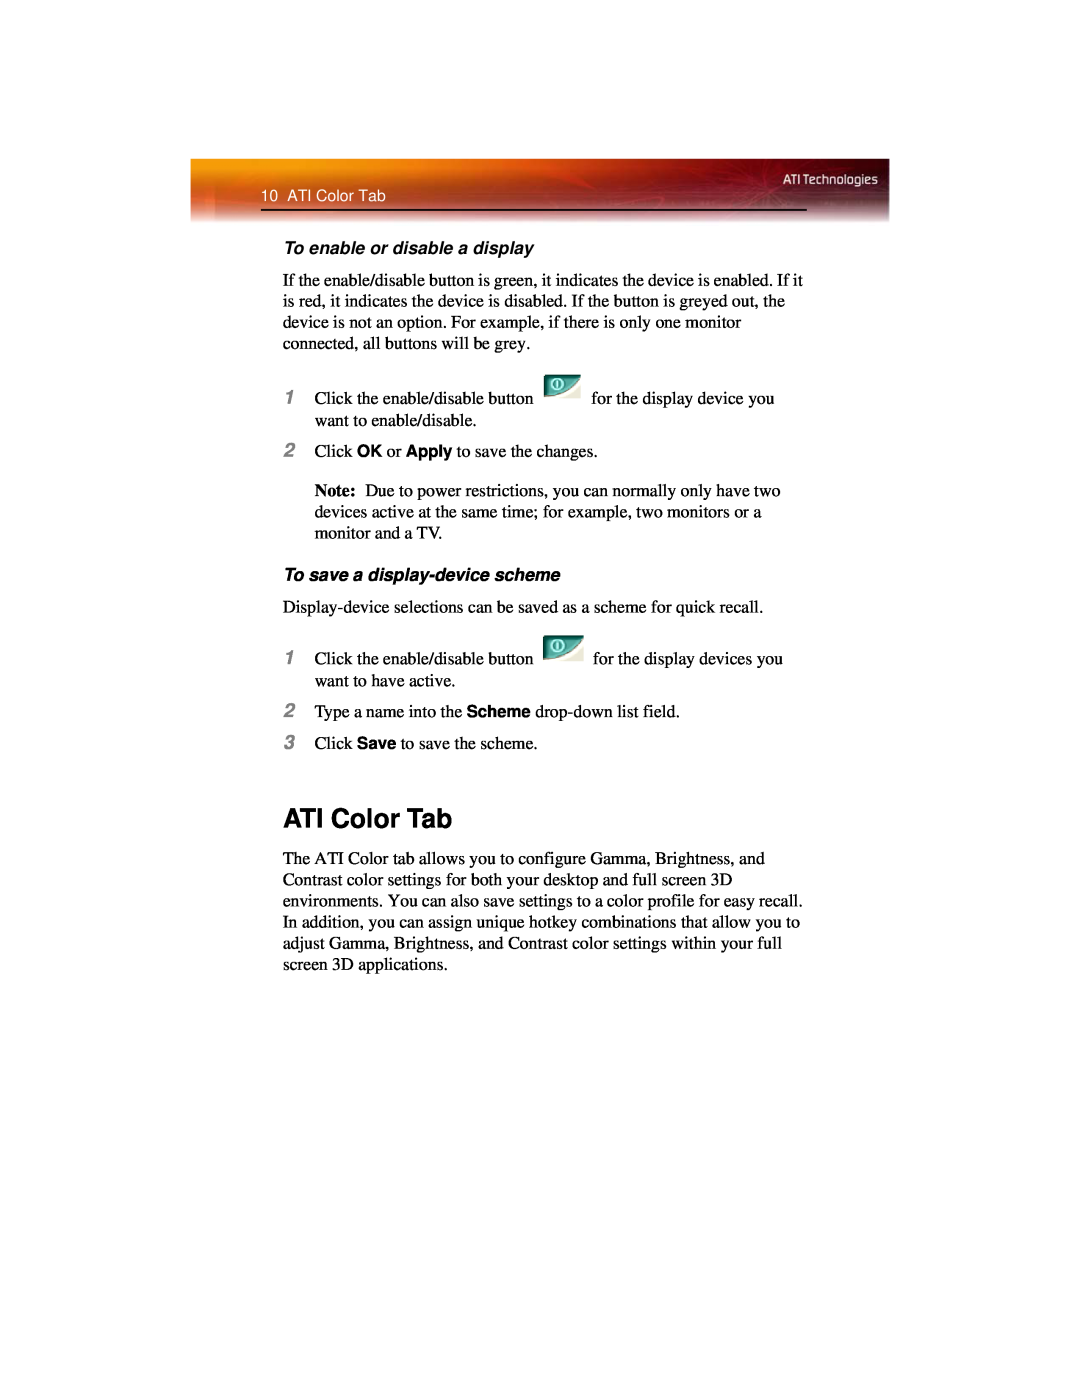 ATI Technologies X600 manual ATI Color Tab, To enable or disable a display, To save a display-device scheme 